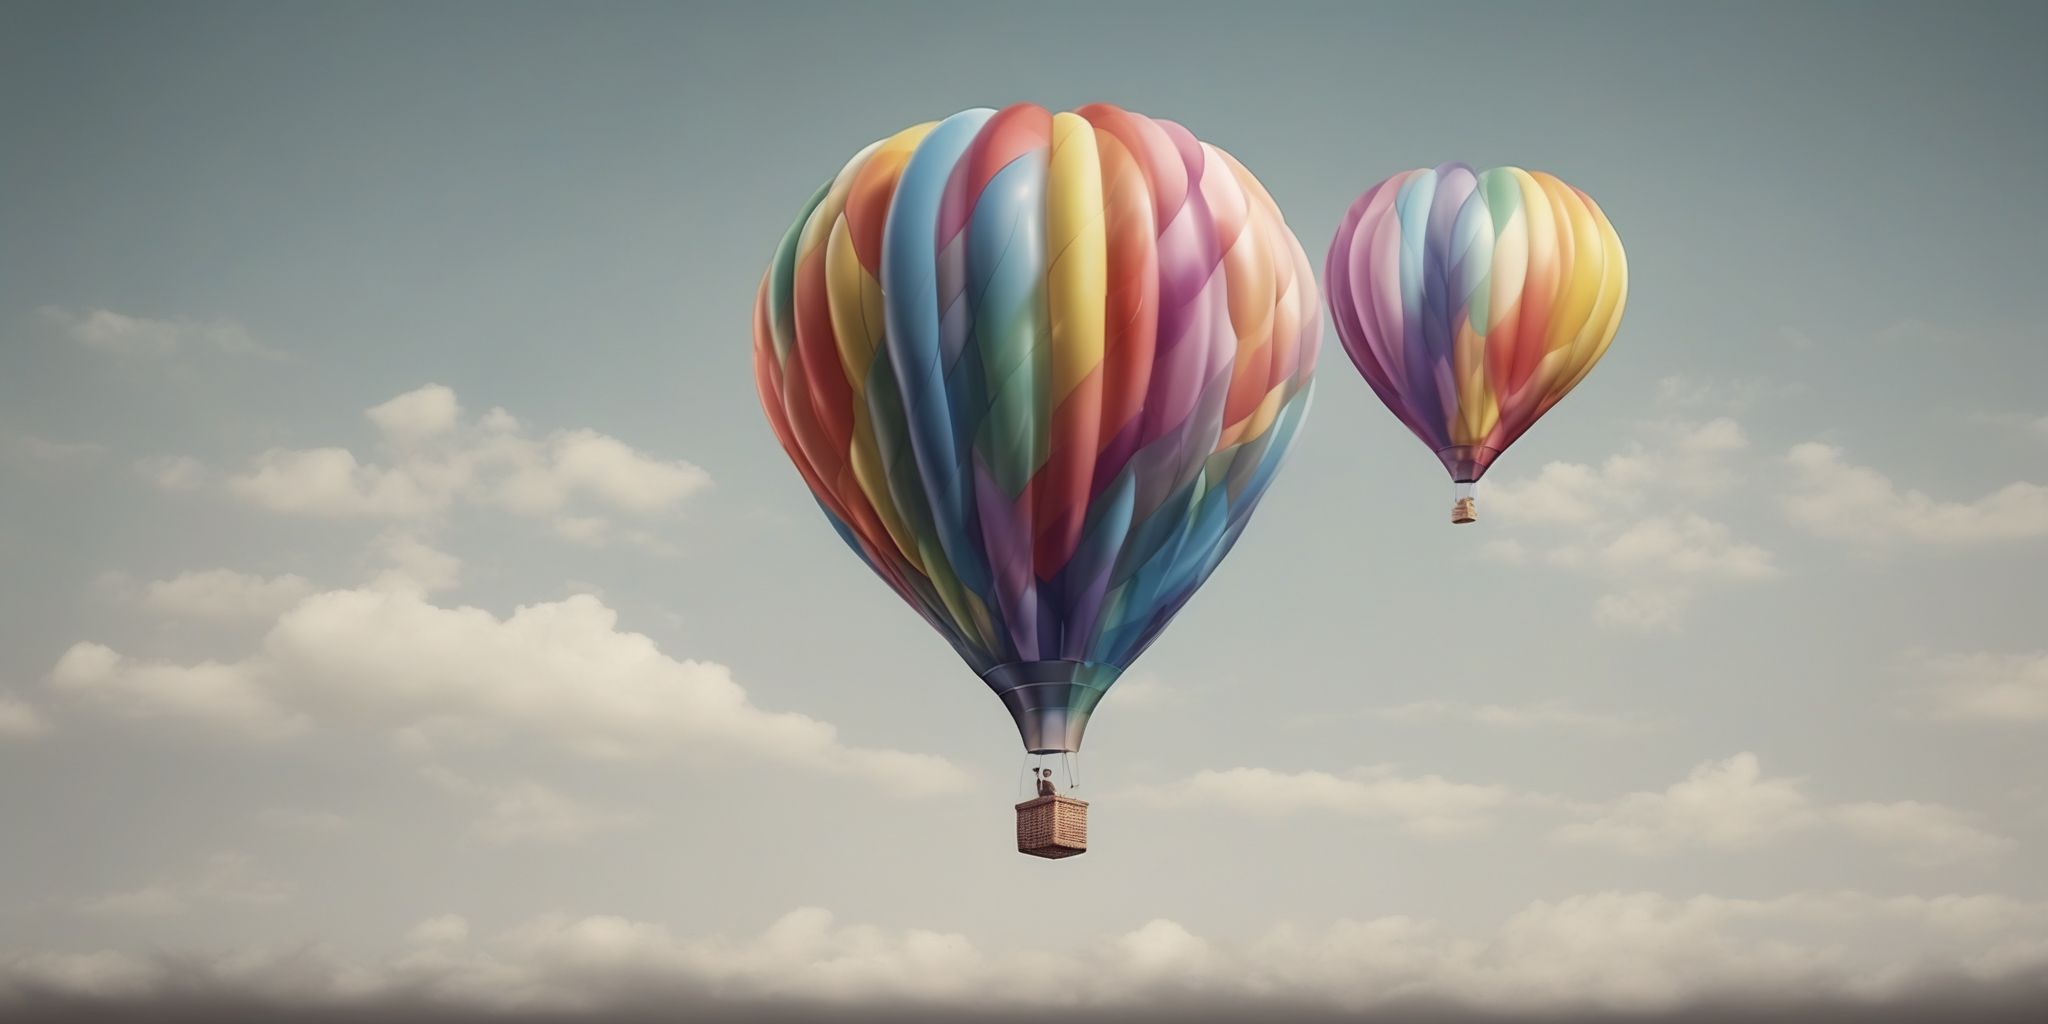 Balloon  in realistic, photographic style